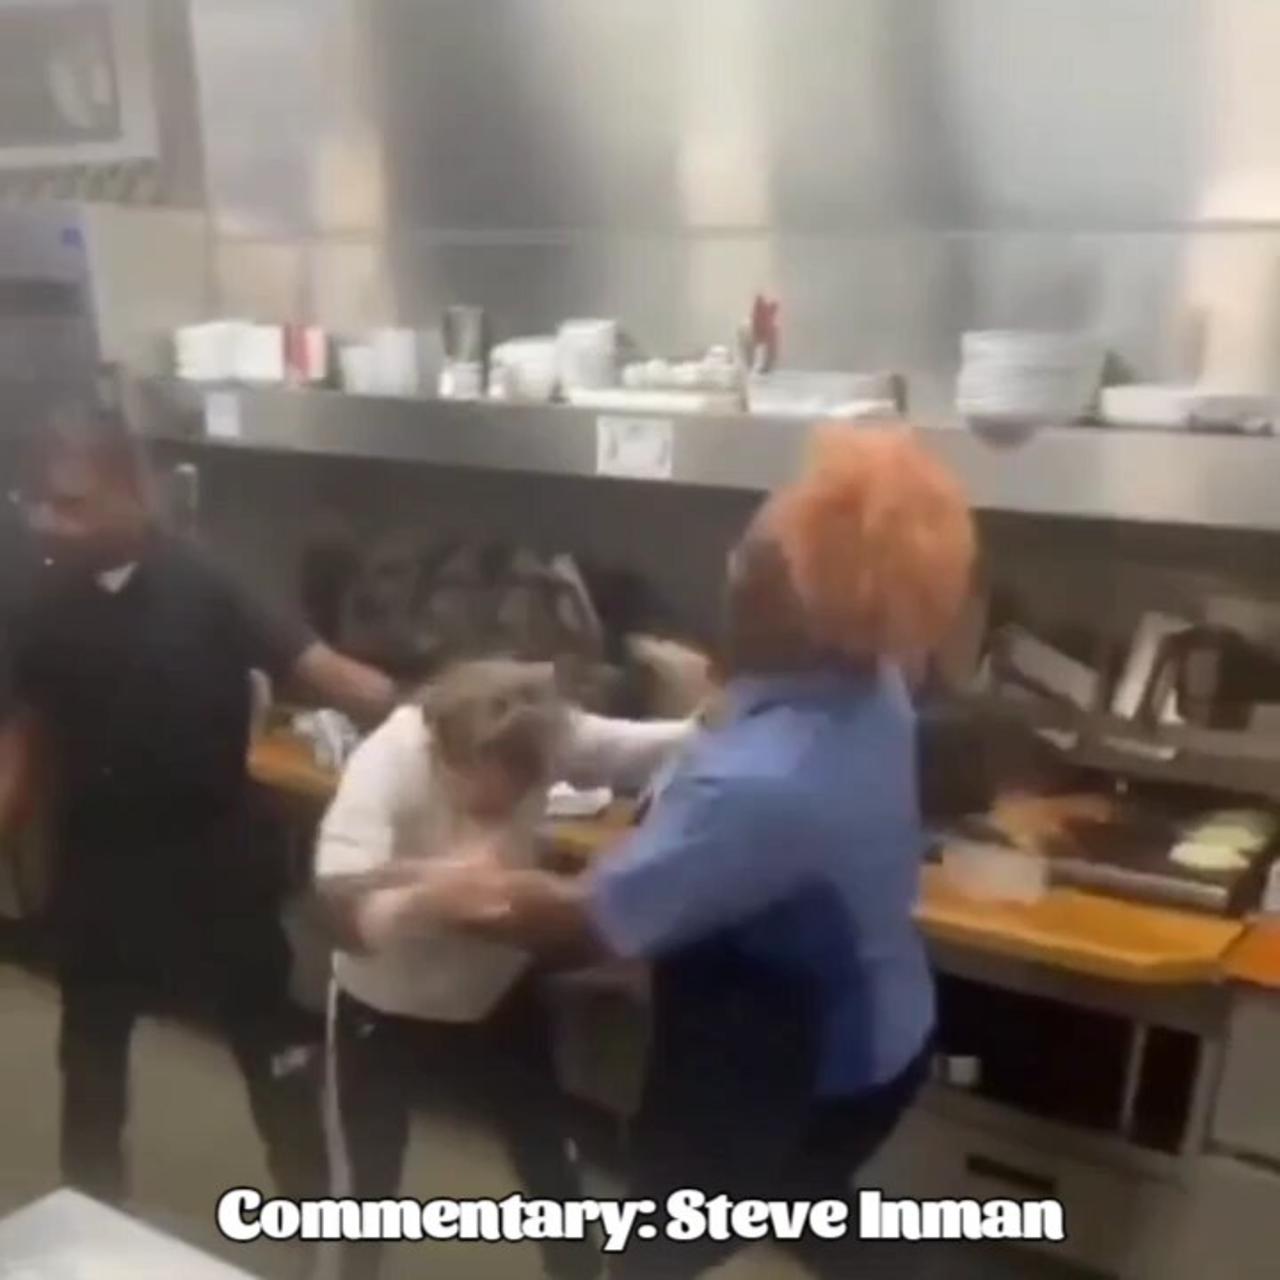 Just another day at Waffle House